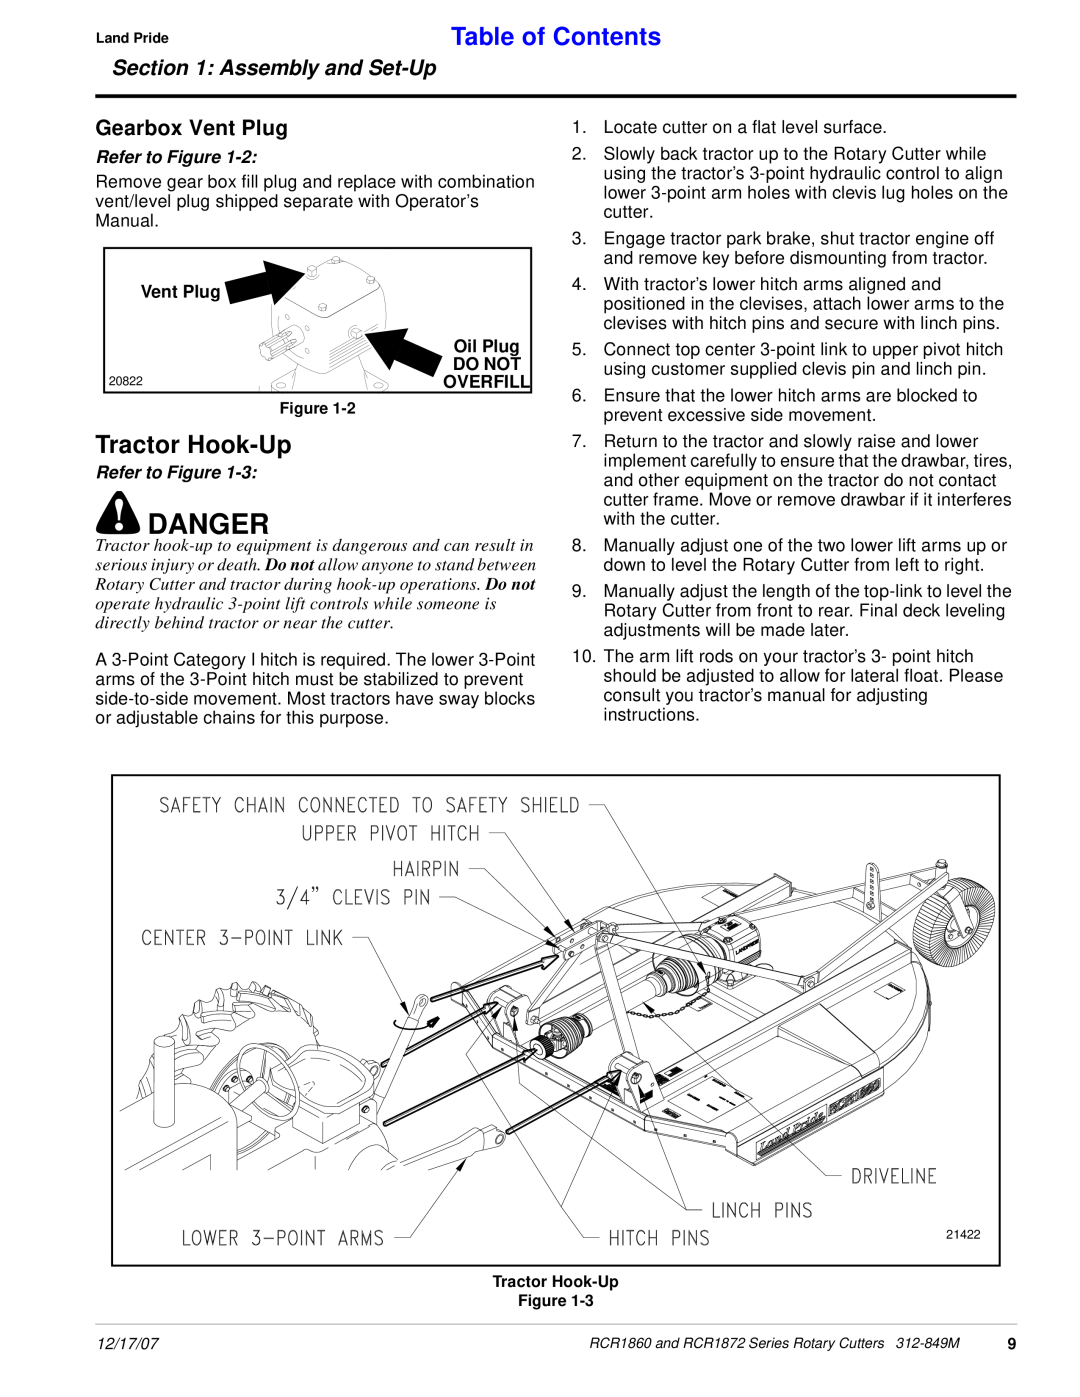 Land Pride RCR1872 Danger, Tractor Hook-Up, Table of Contents, Gearbox Vent Plug, Do Not, Overfill, Assembly and Set-Up 